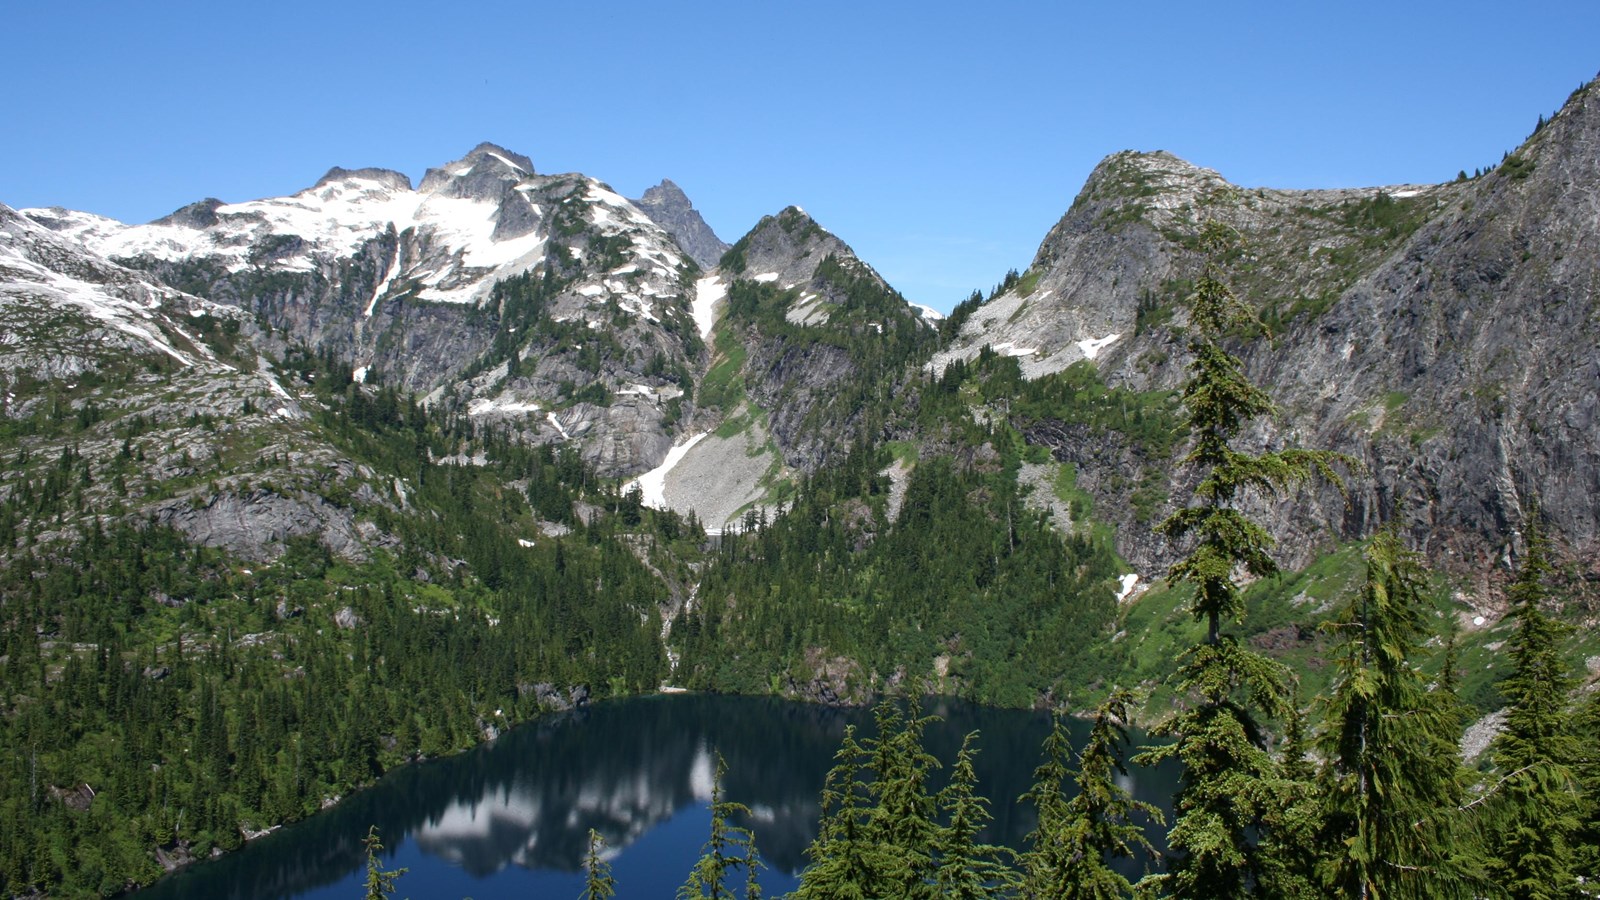 A blue lake surrounded by forested mountains.